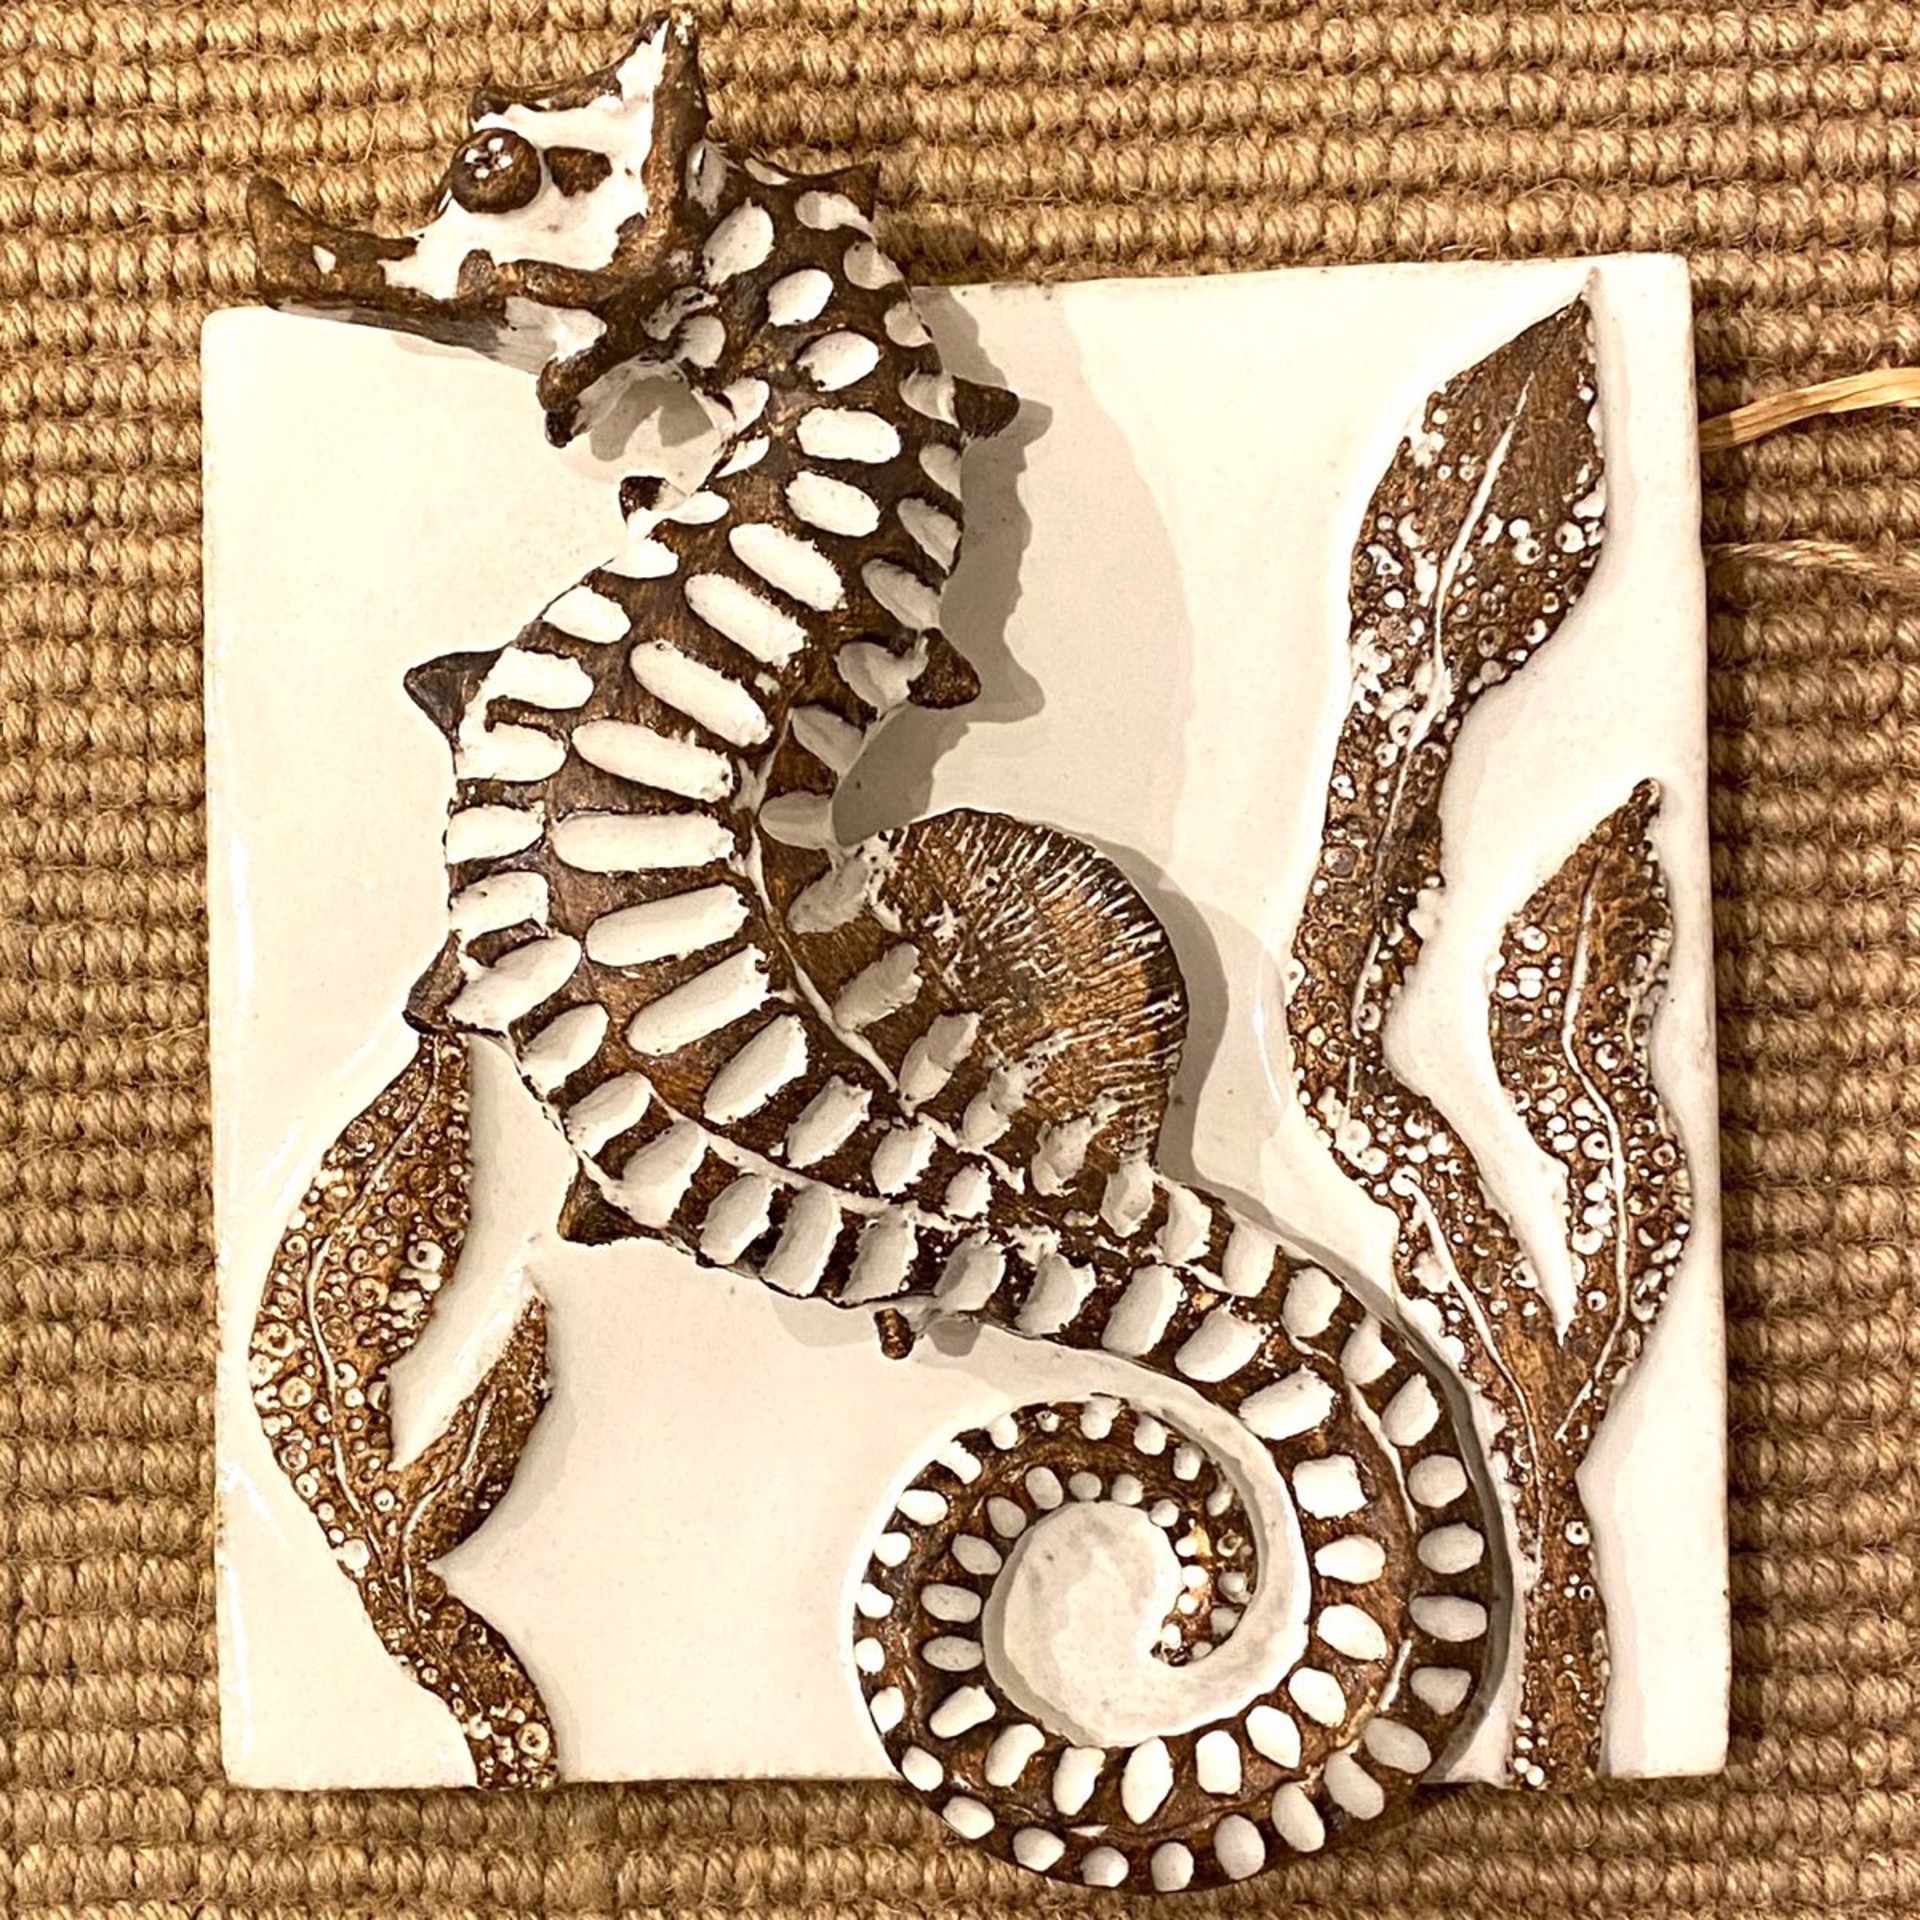 Seahorse Tile by Shayne Greco